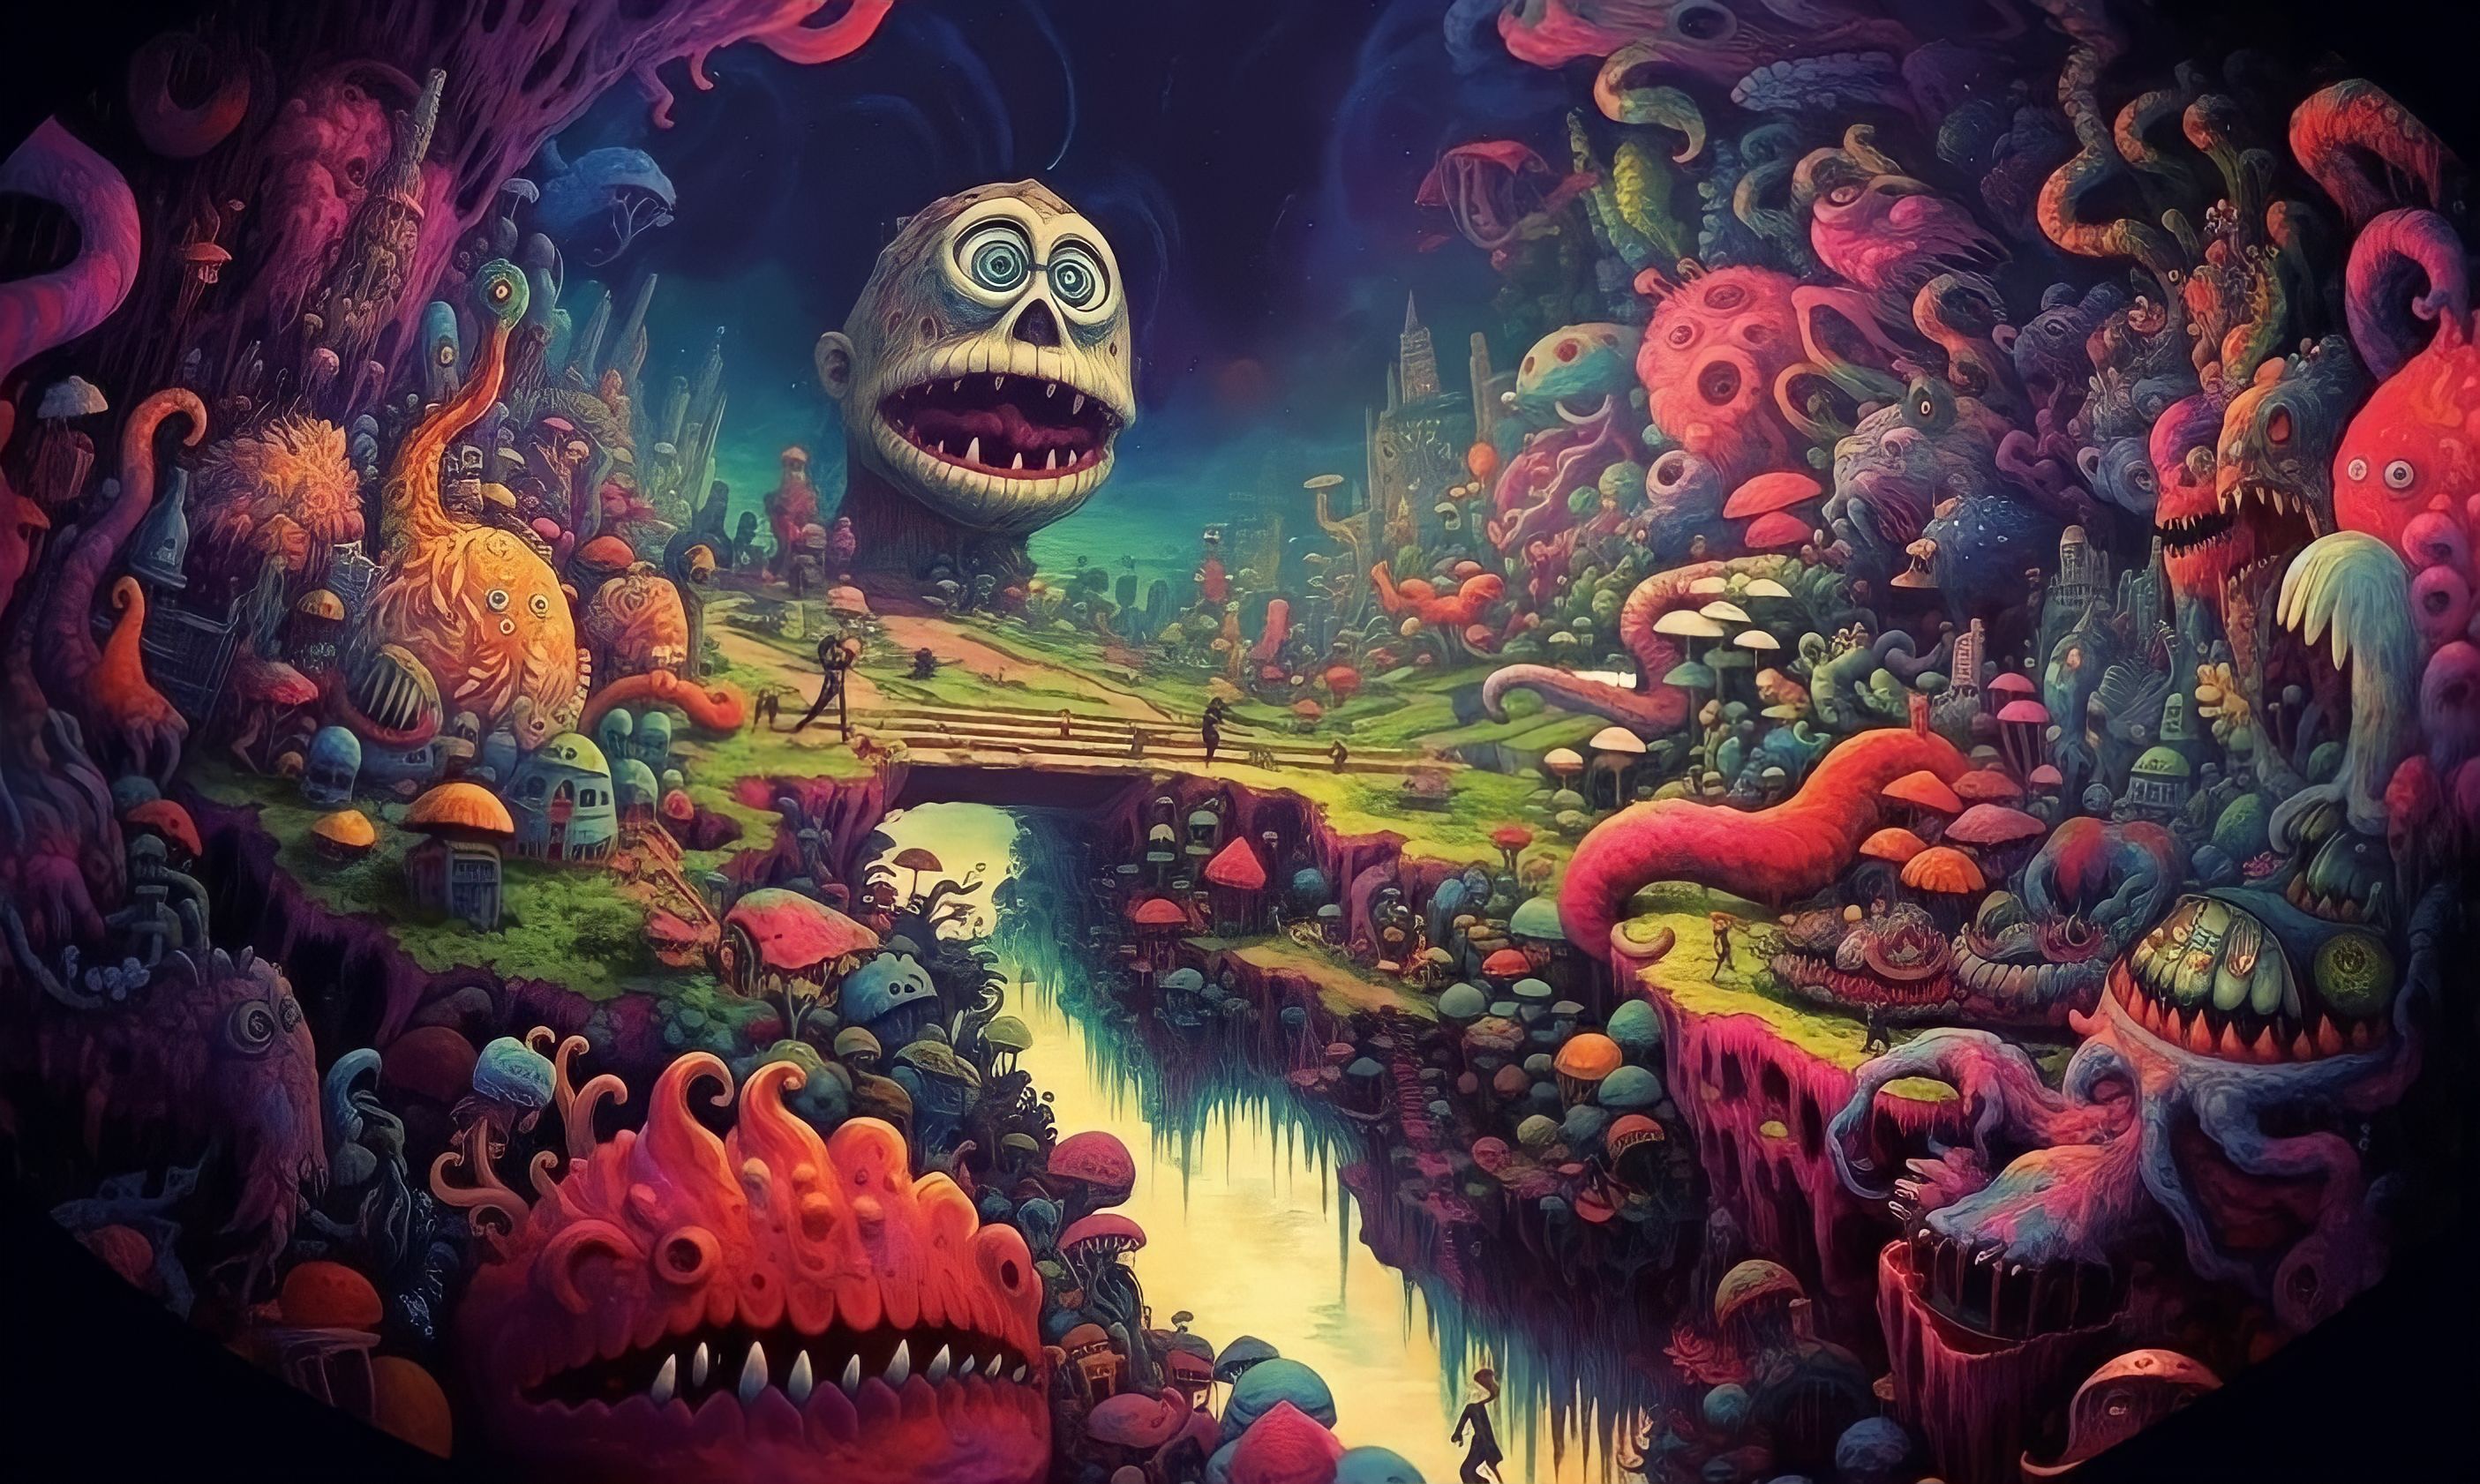 Weirdcore/Dreamcore Mushroom Painting by tangthecurrentwing3 on DeviantArt